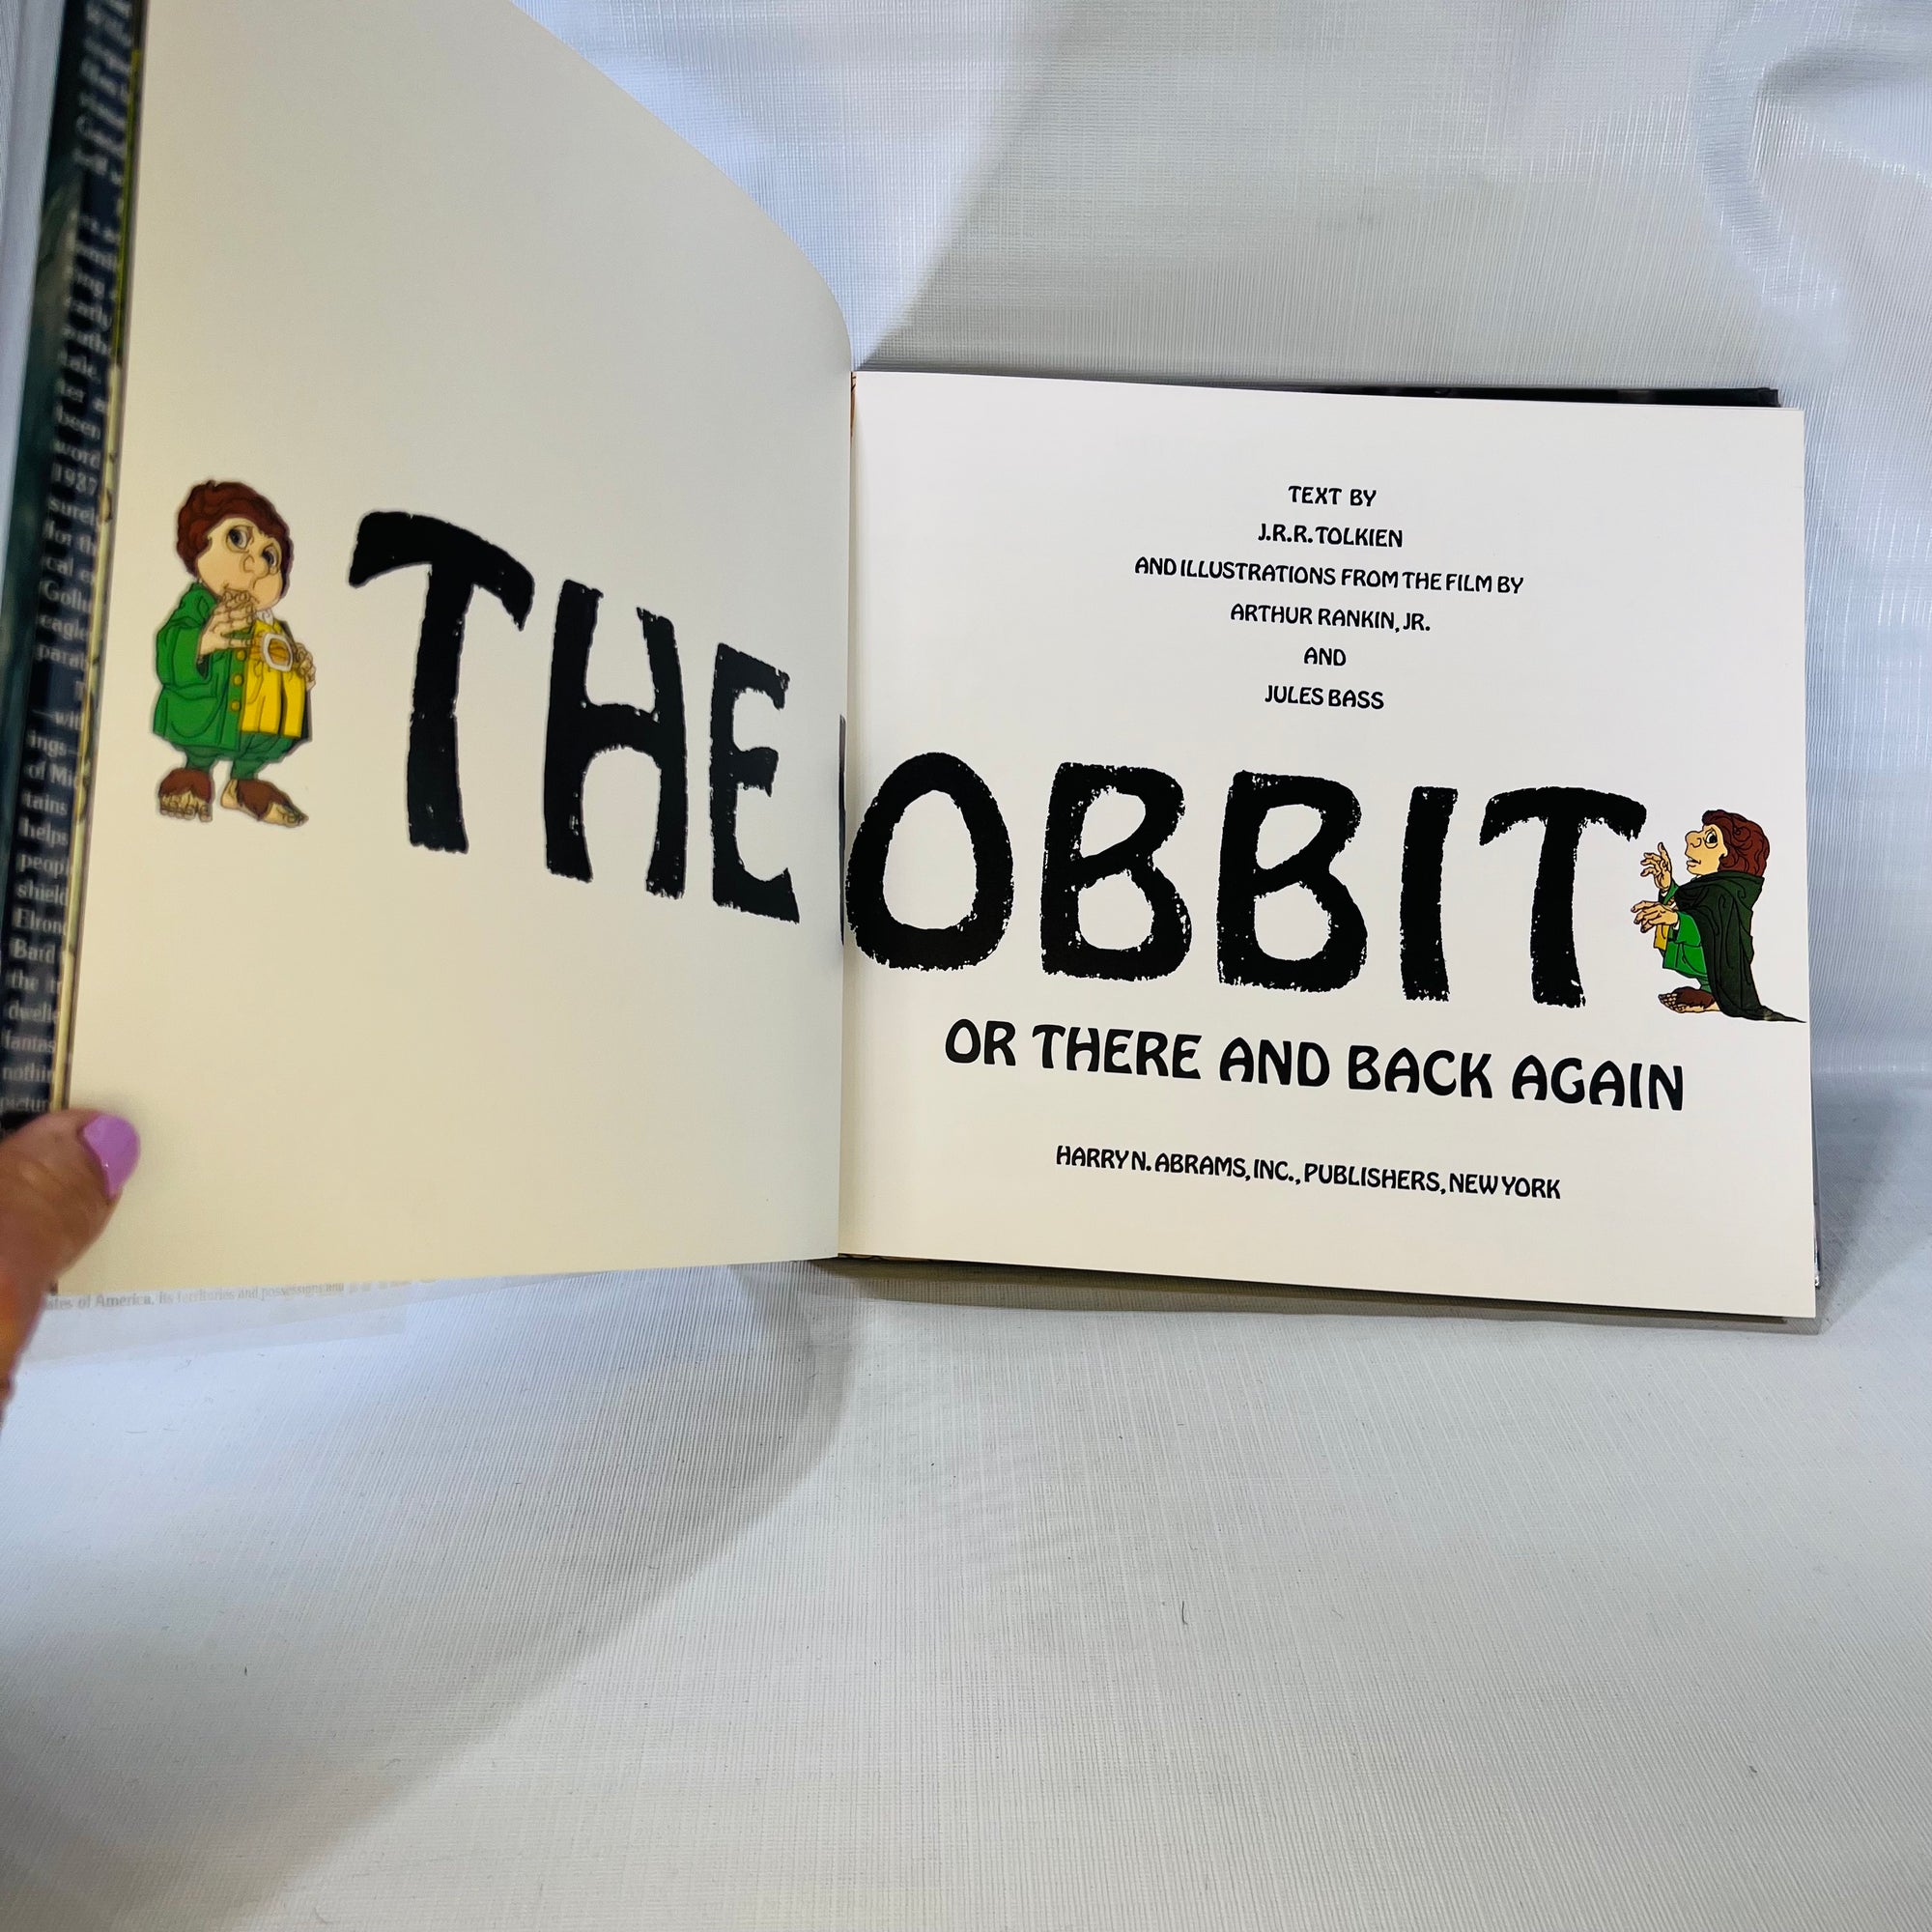 The Hobbit an Illustrated Edition from the Film by Arthur Rankin Jr. with Text by J.J.R. Tolkien 1977 Harry N. Abrams, Inc.